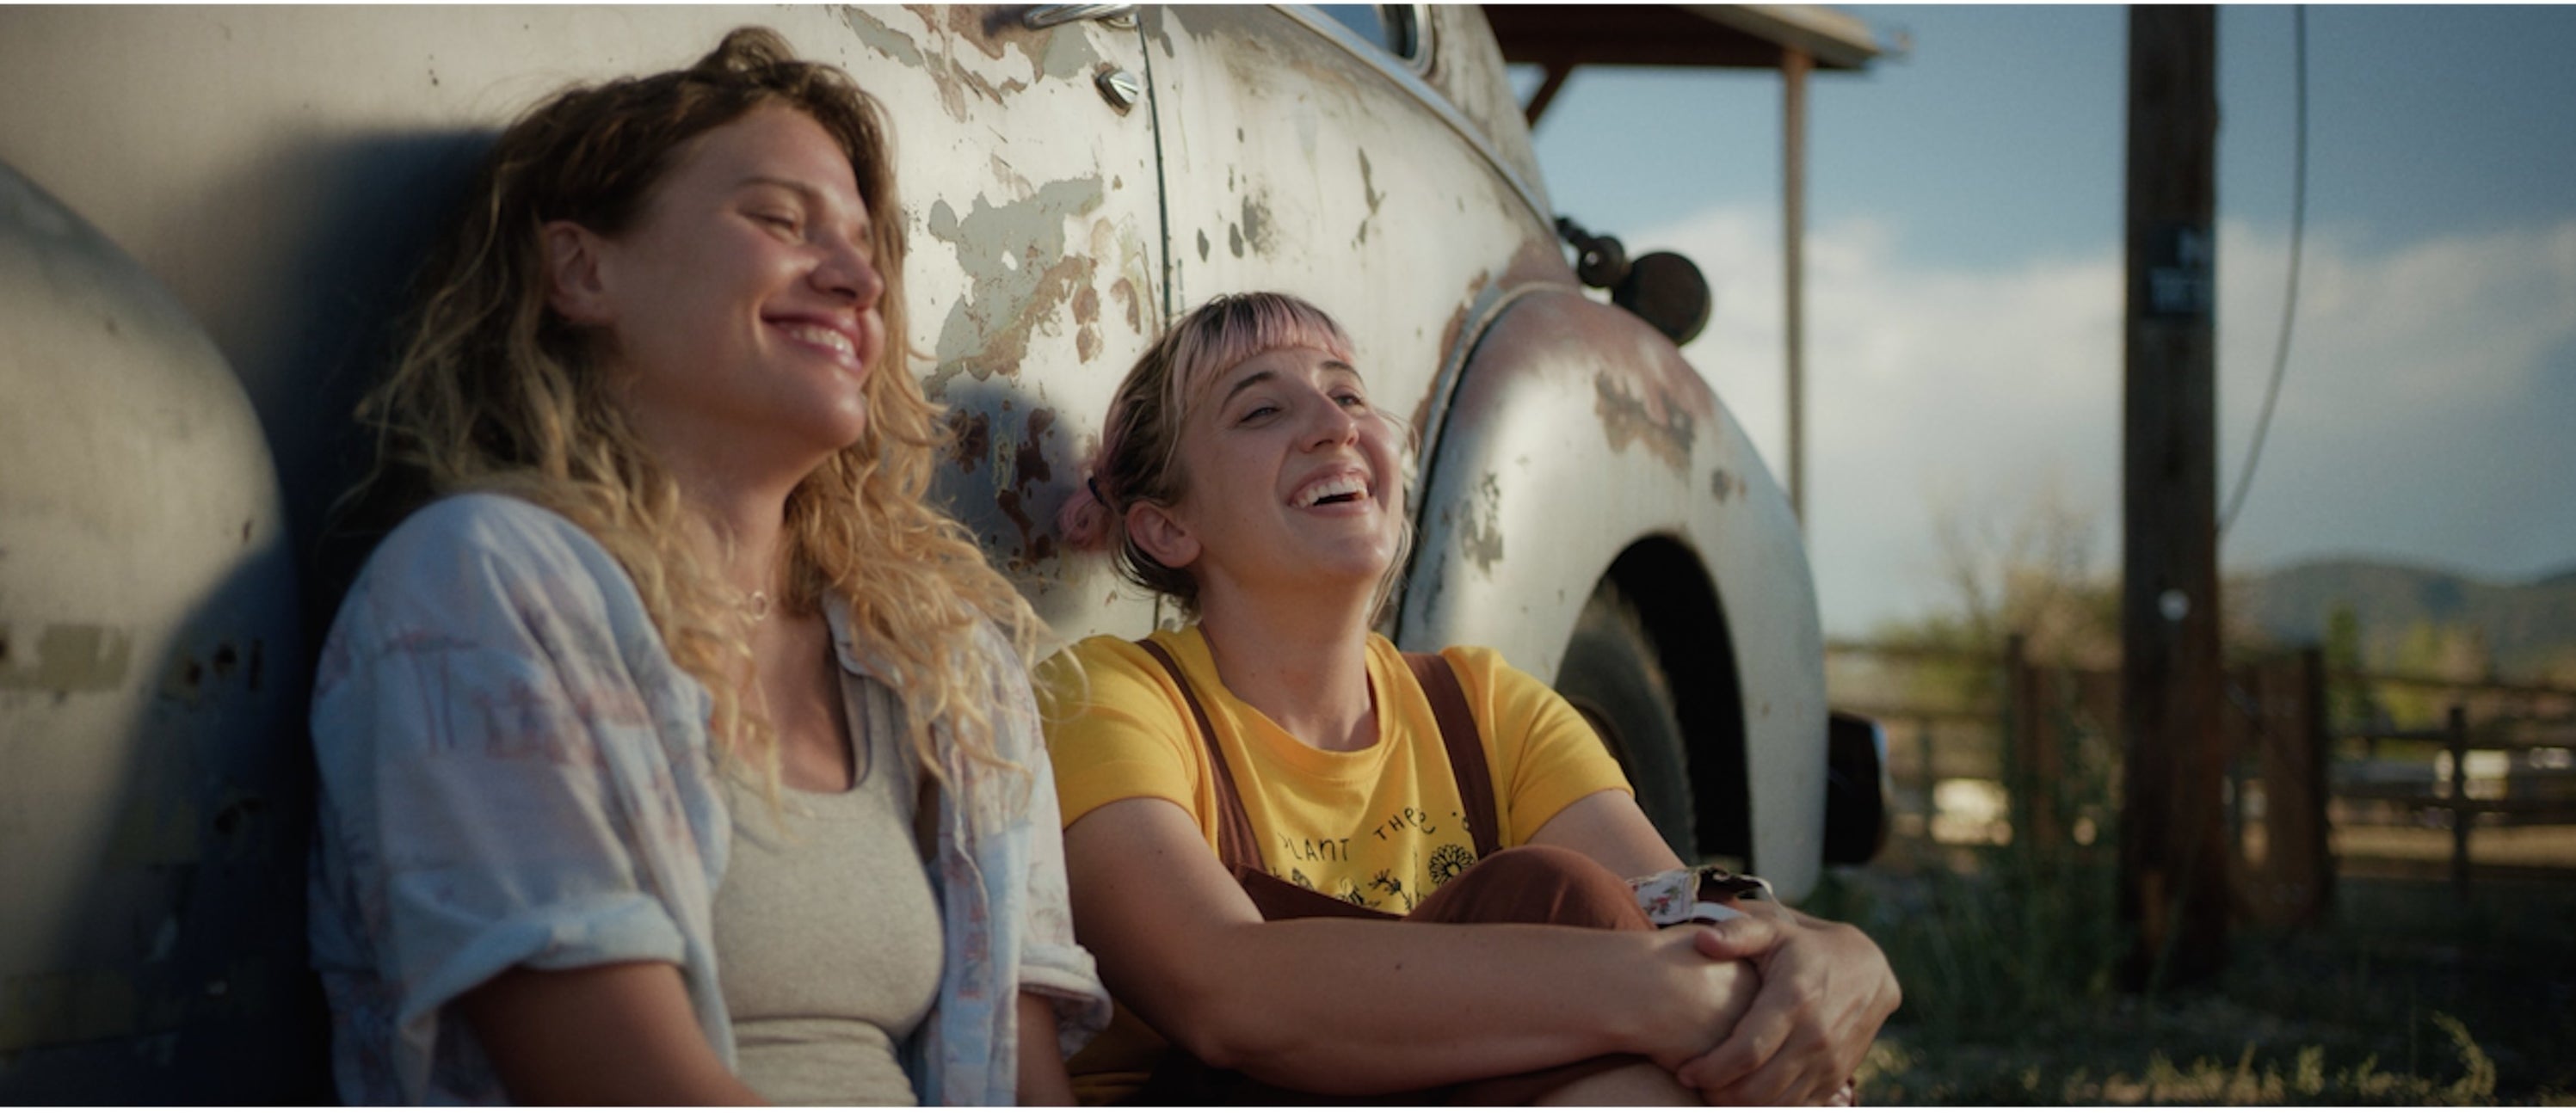 The two sisters laughing while sitting on the ground next to a car